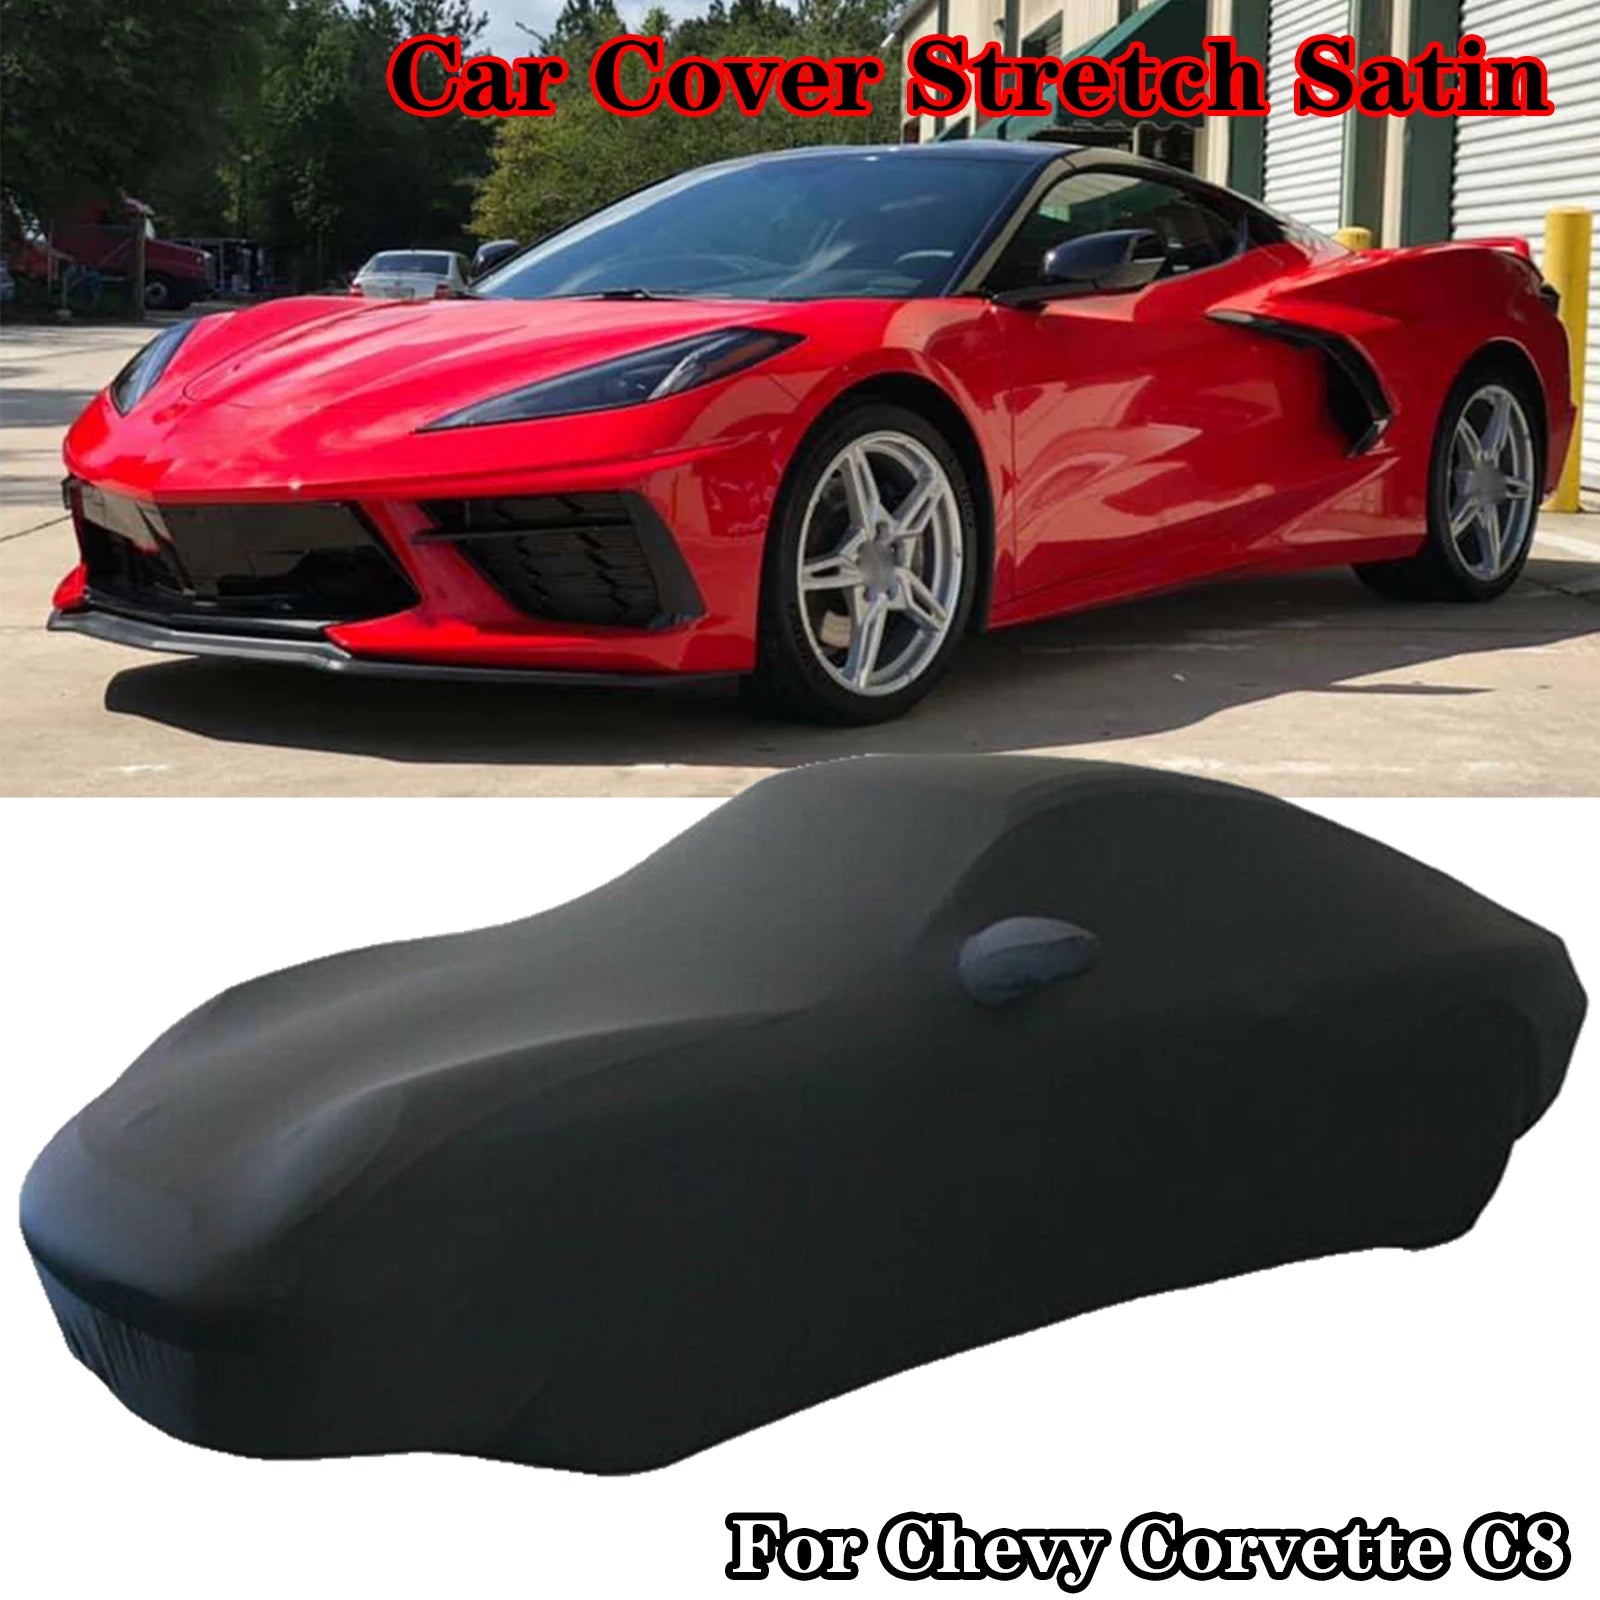 Car Cover Stretch Satin Scratch Dustproof Ultraviolet-proof Indoor For Chevy Corvette C8